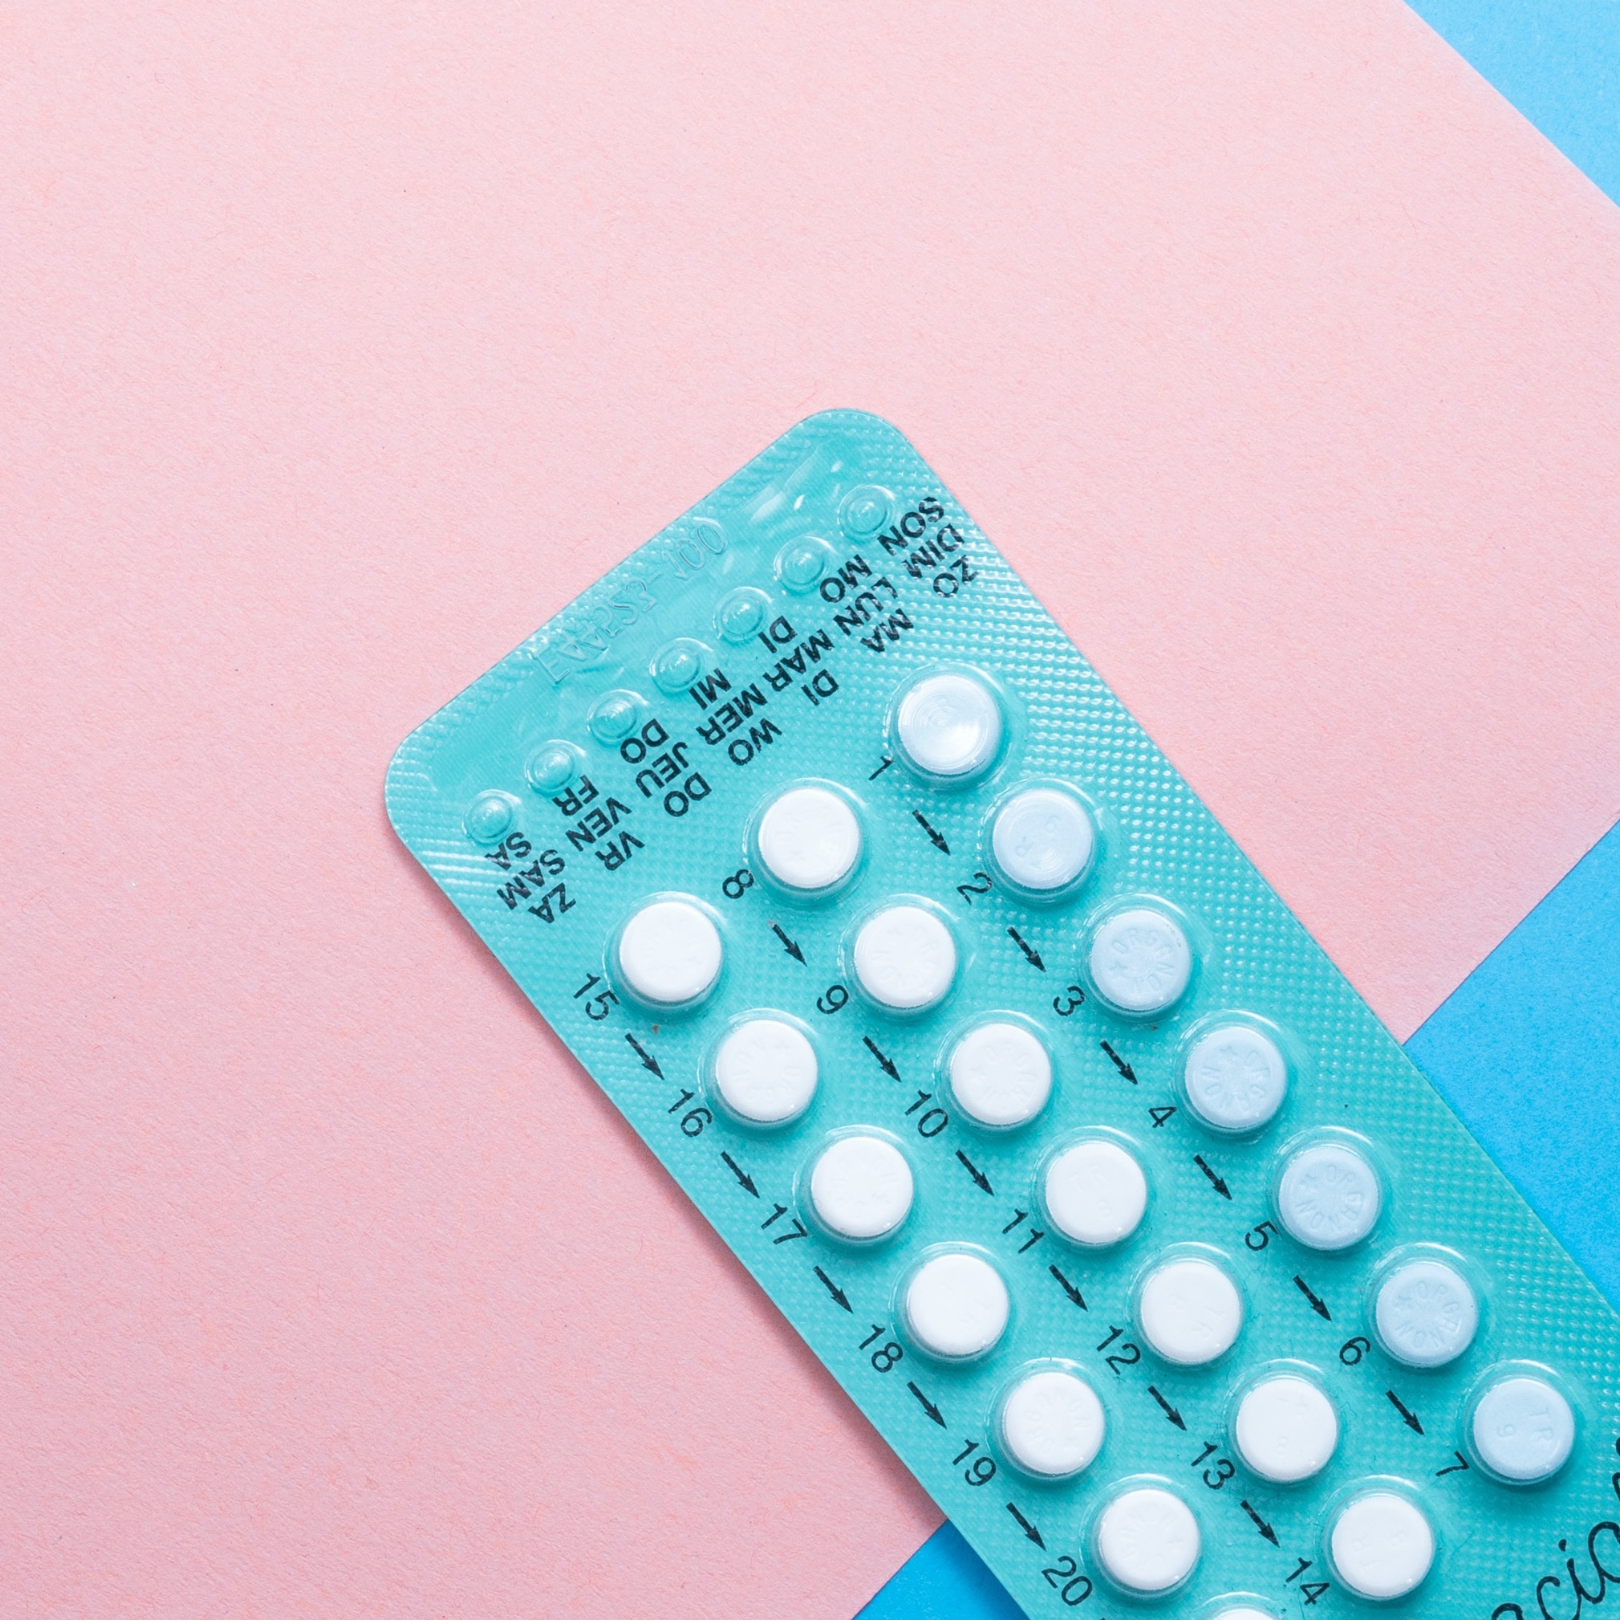 Is it time to quit the pill?